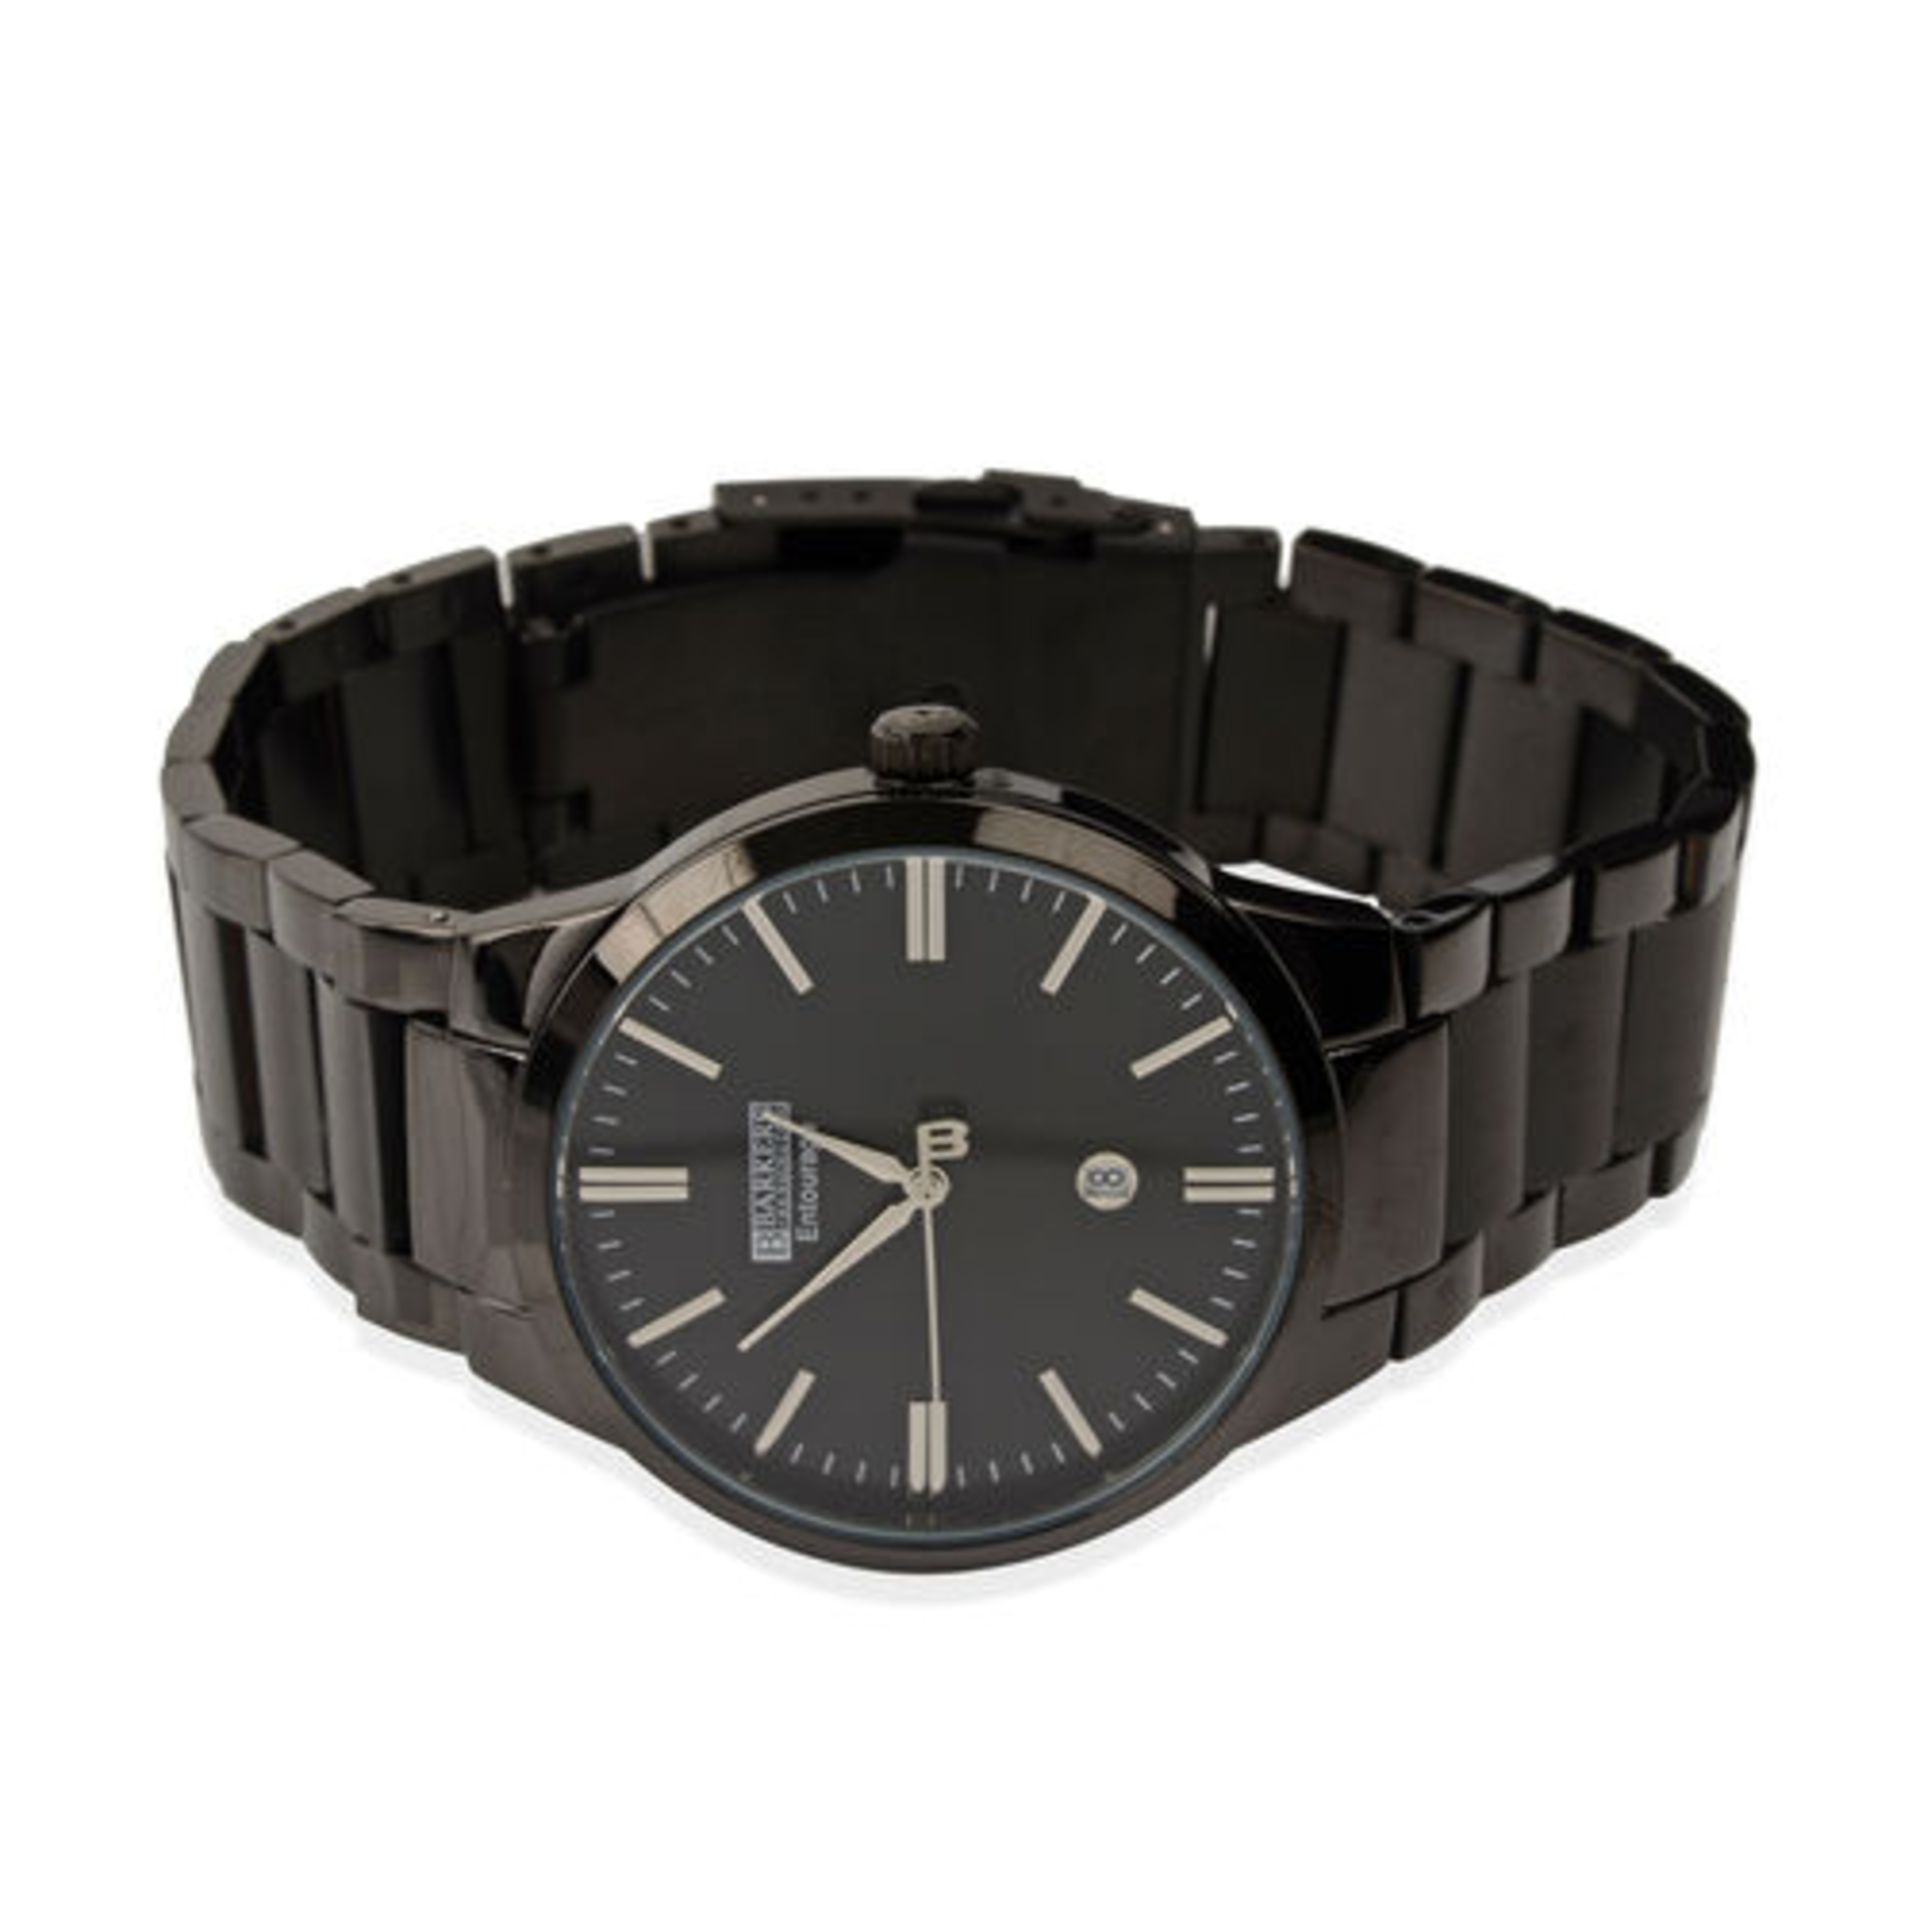 Barkers of Kensington Entourage Black Face with Silver Men's stylish Watch, new and boxed. - Image 2 of 4